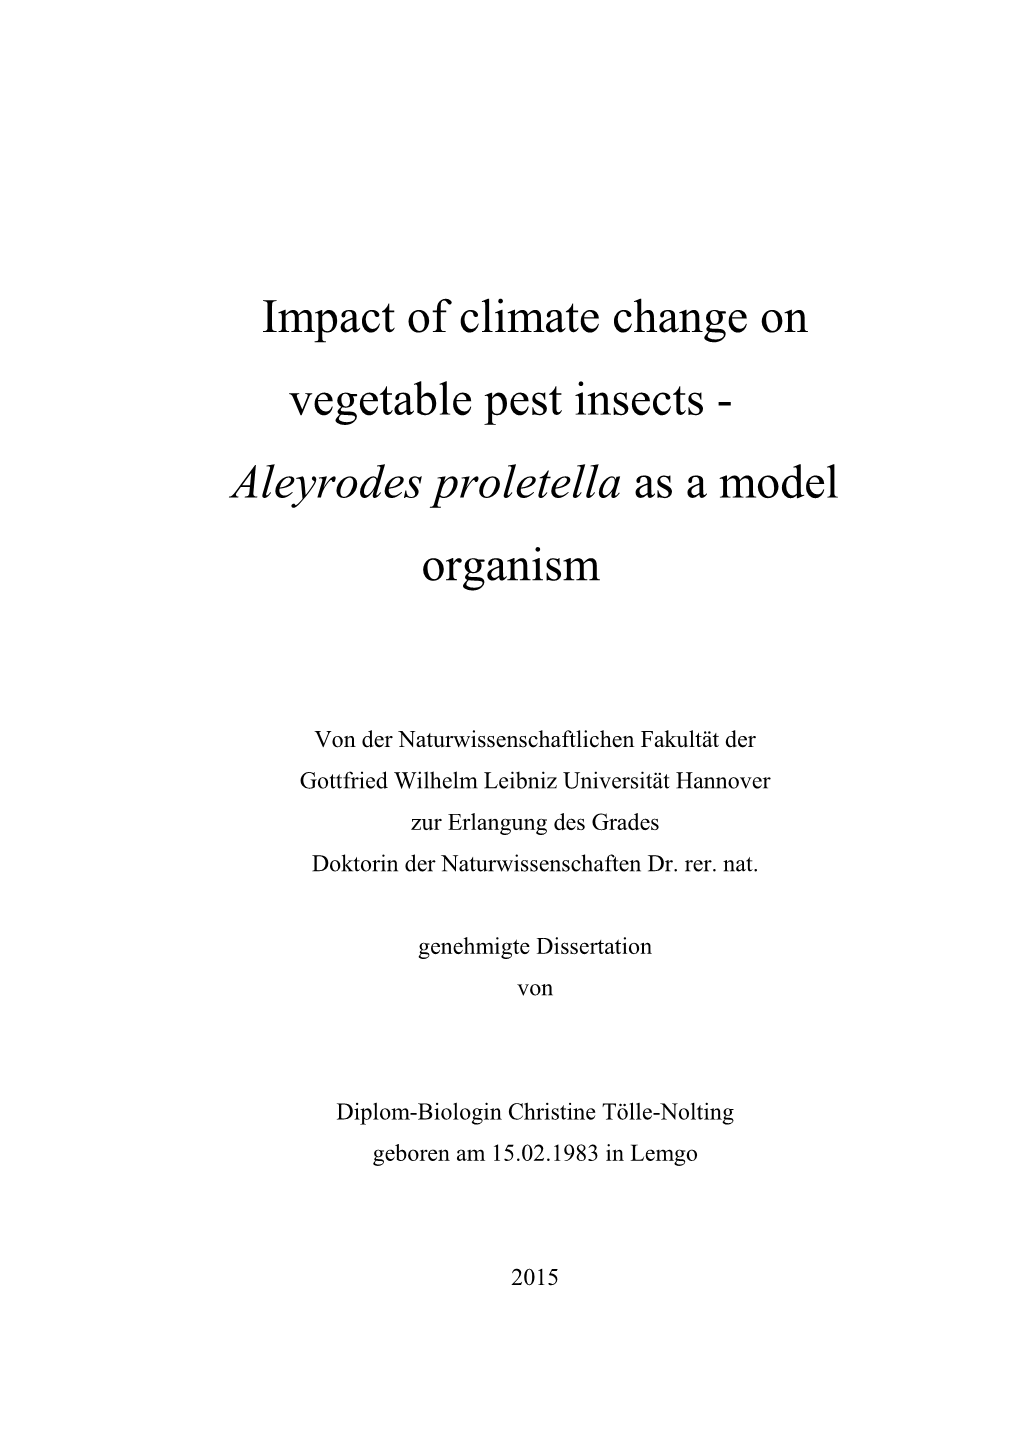 Impact of Climate Change on Vegetable Pest Insects - Aleyrodes Proletella As a Model Organism